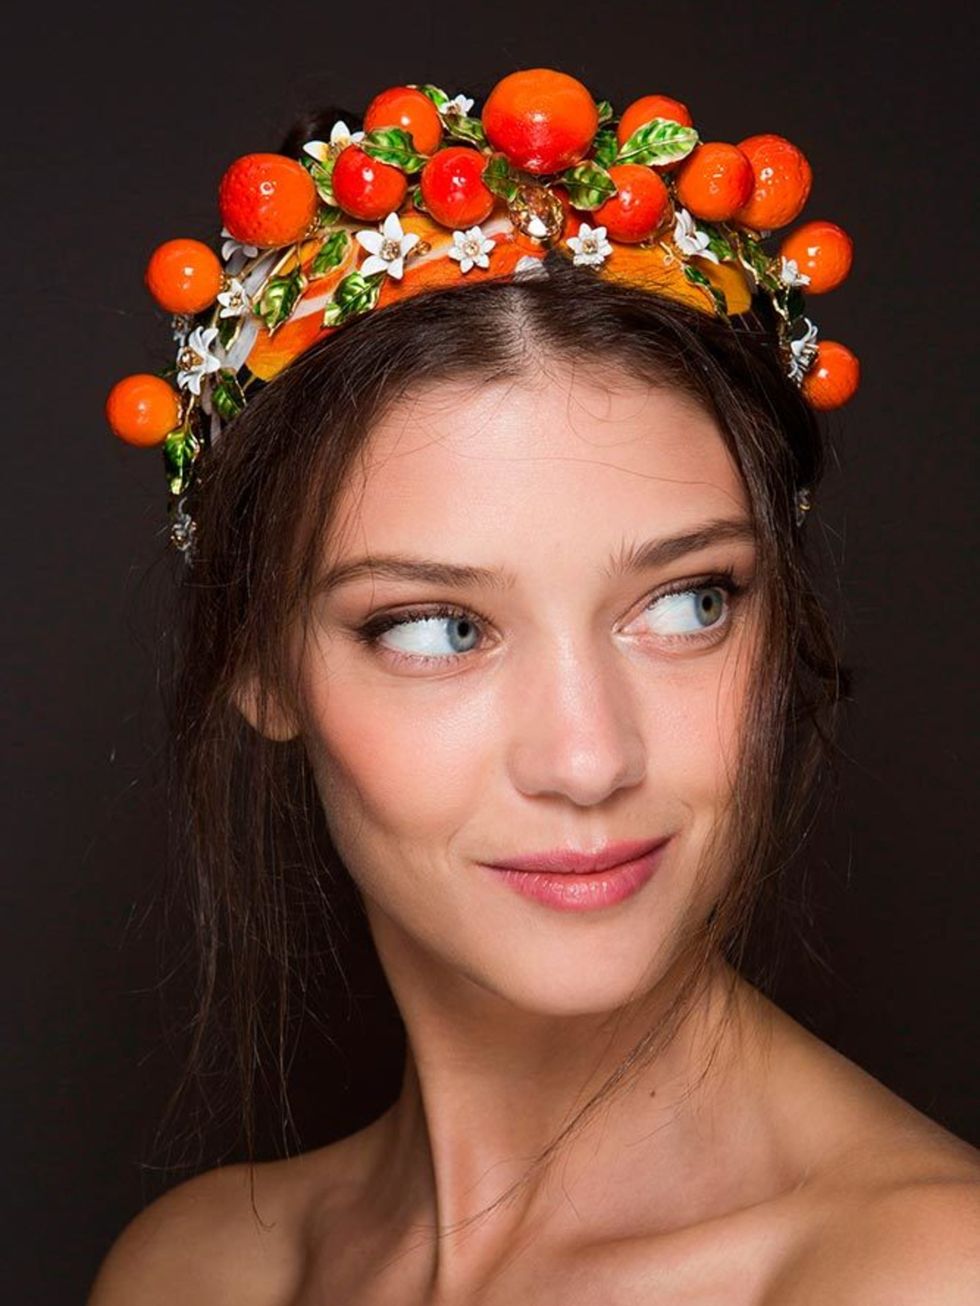 <p><a href="http://www.elleuk.com/catwalk/dolce-gabbana/spring-summer-2016"><strong>Dolce & Gabbana</strong></a></p>

<p>The Look: Holiday Vibes</p>

<p>Hair Stylist: <a href="http://www.elleuk.com/beauty/the-beauty-experts-you-need-to-know-charlotte-tilb